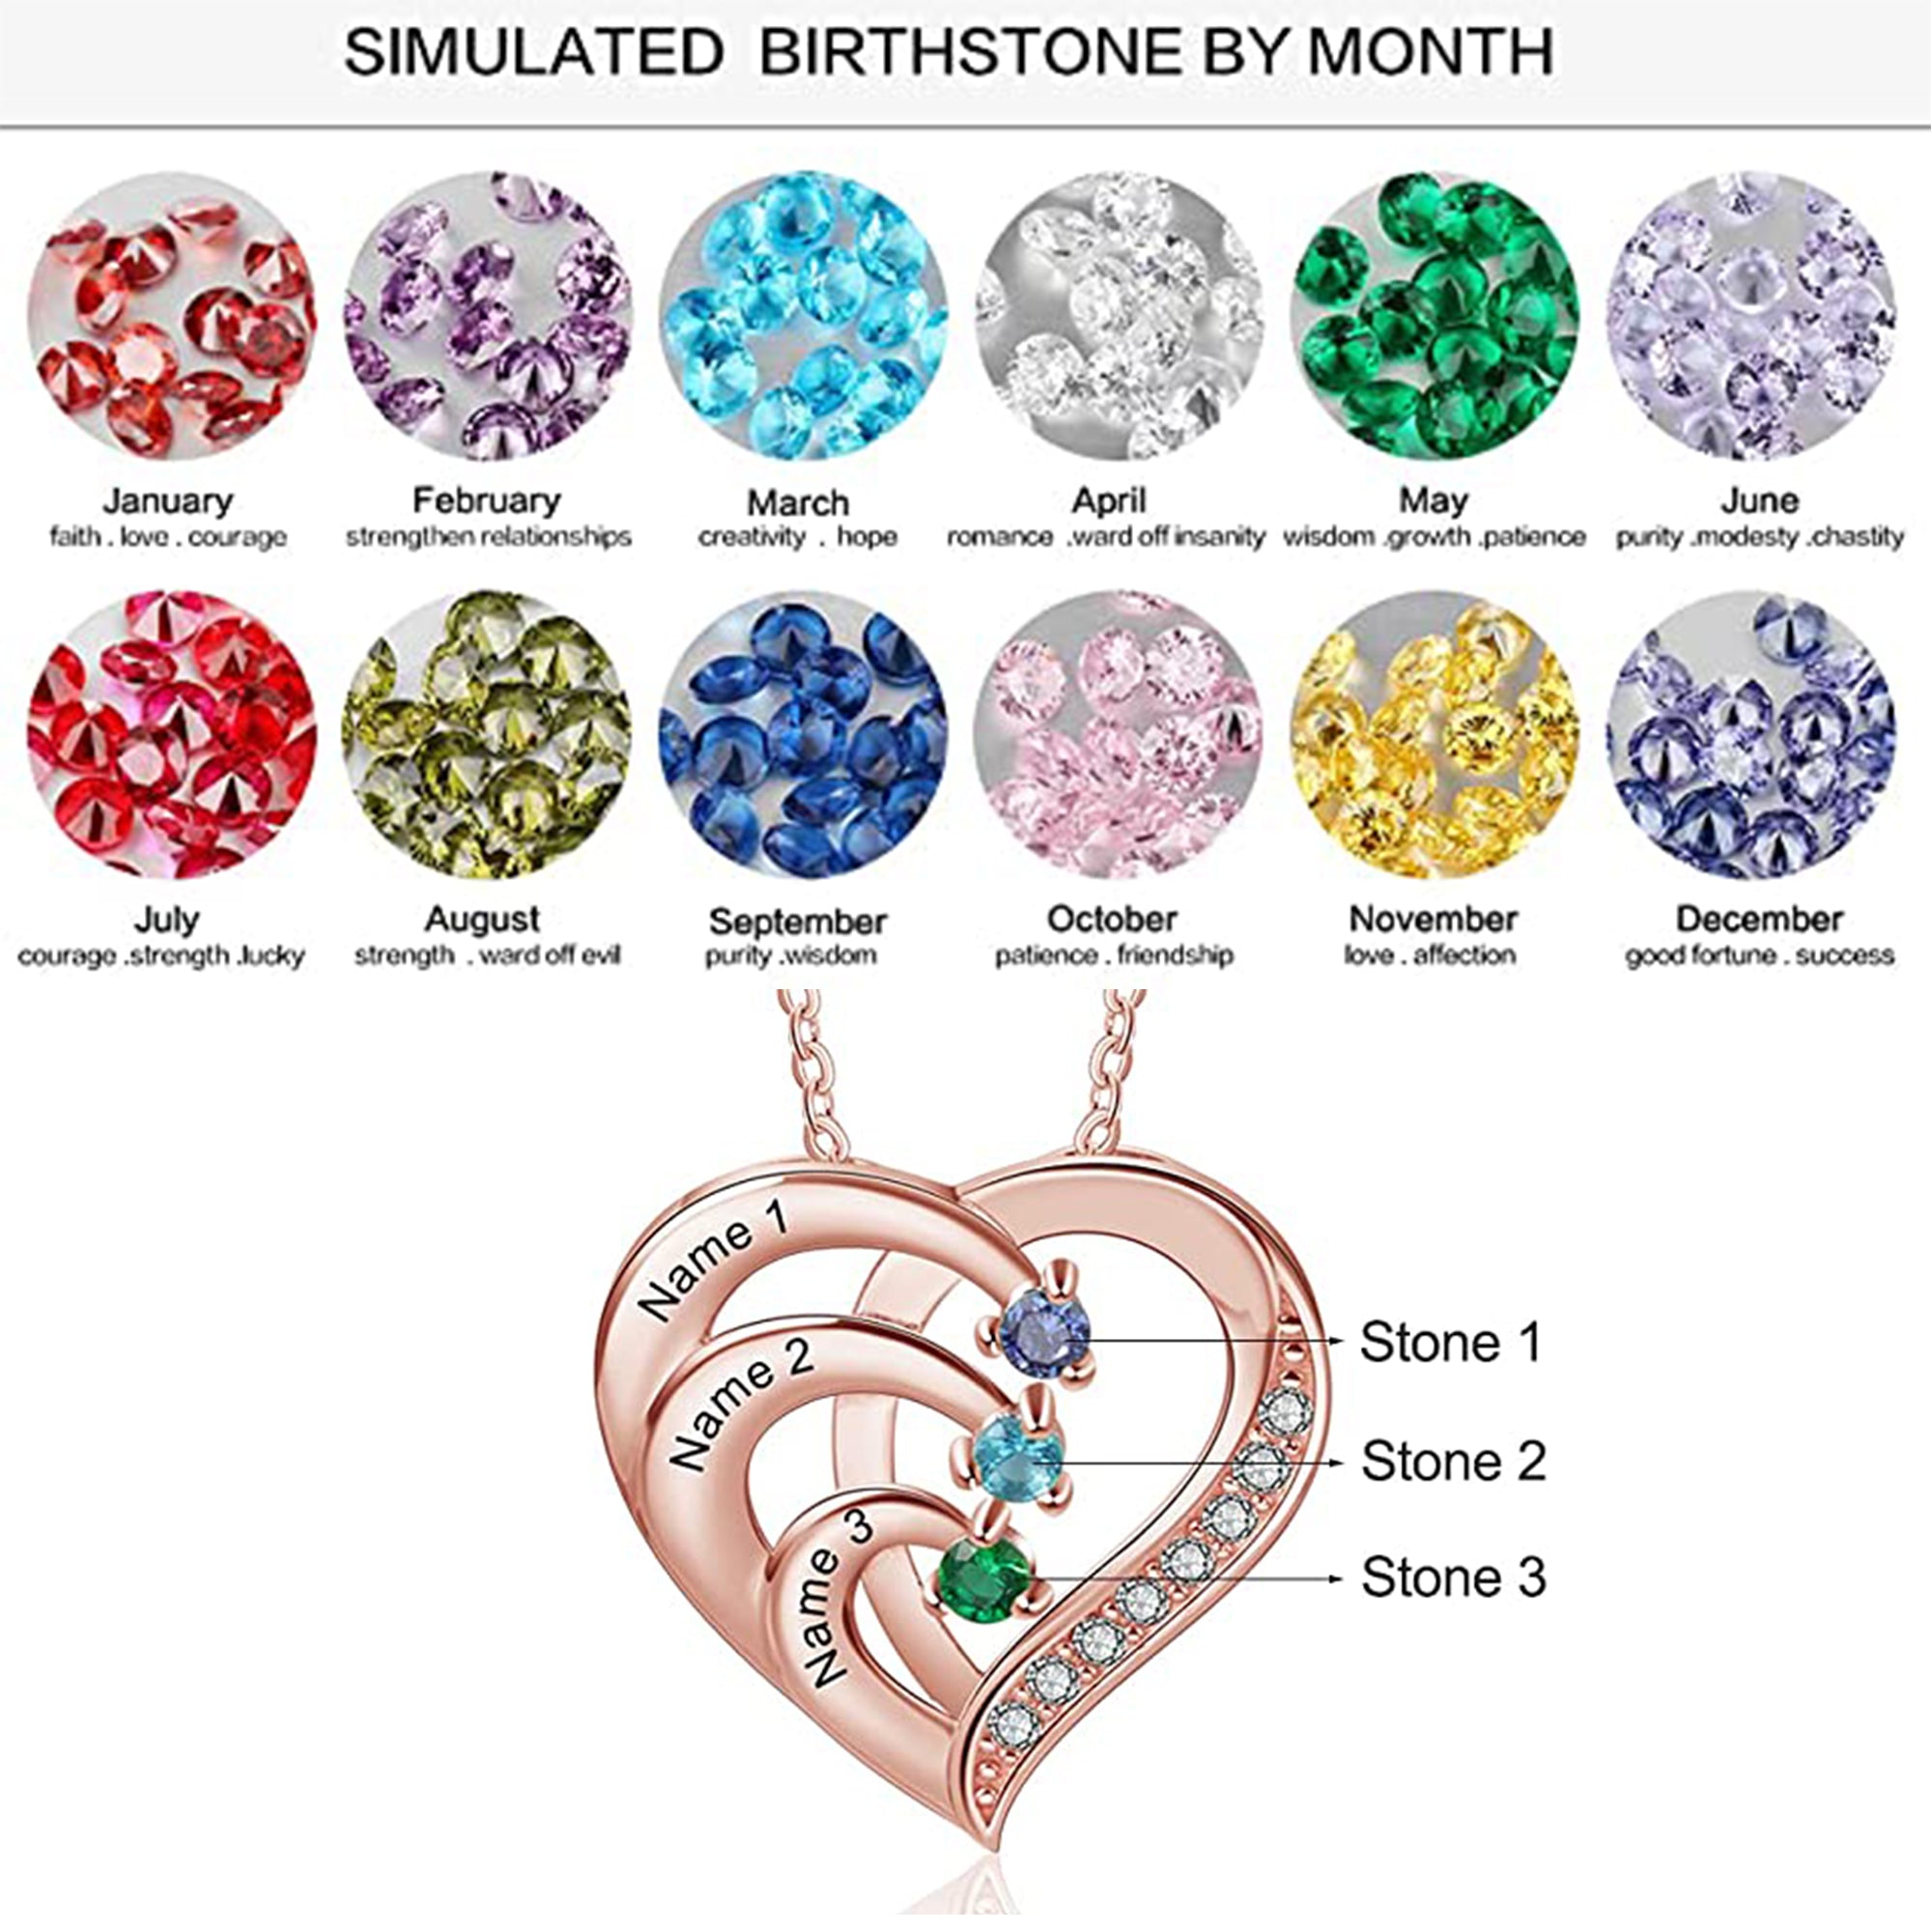 Birthstone Heart Necklace 2 to 4 Stones